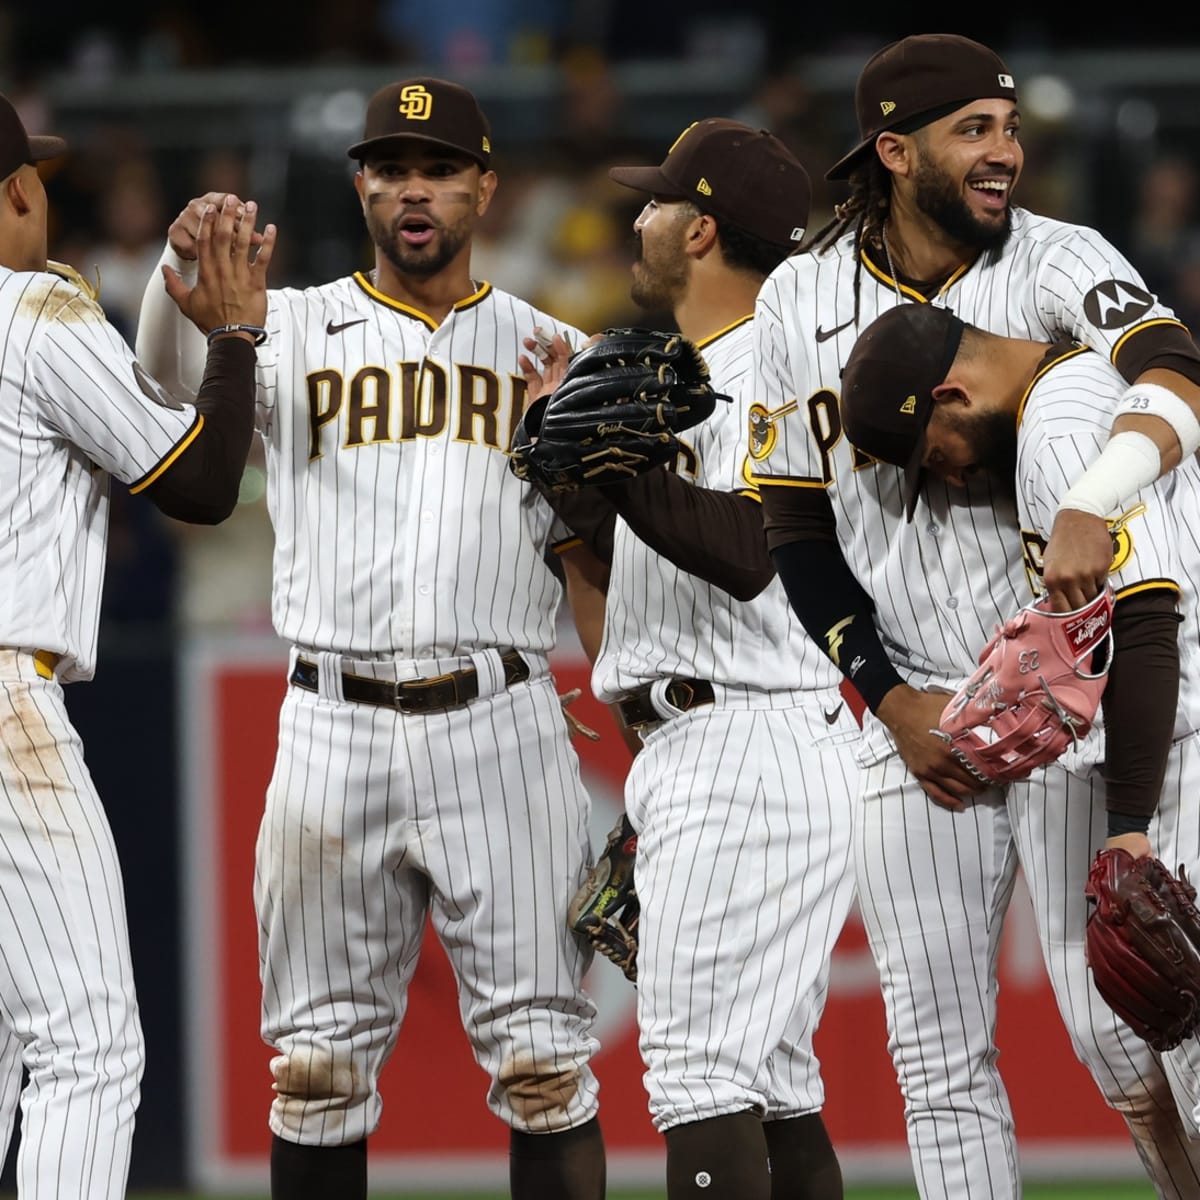 San Diego Padres - Guess what's back, back again. Head to the